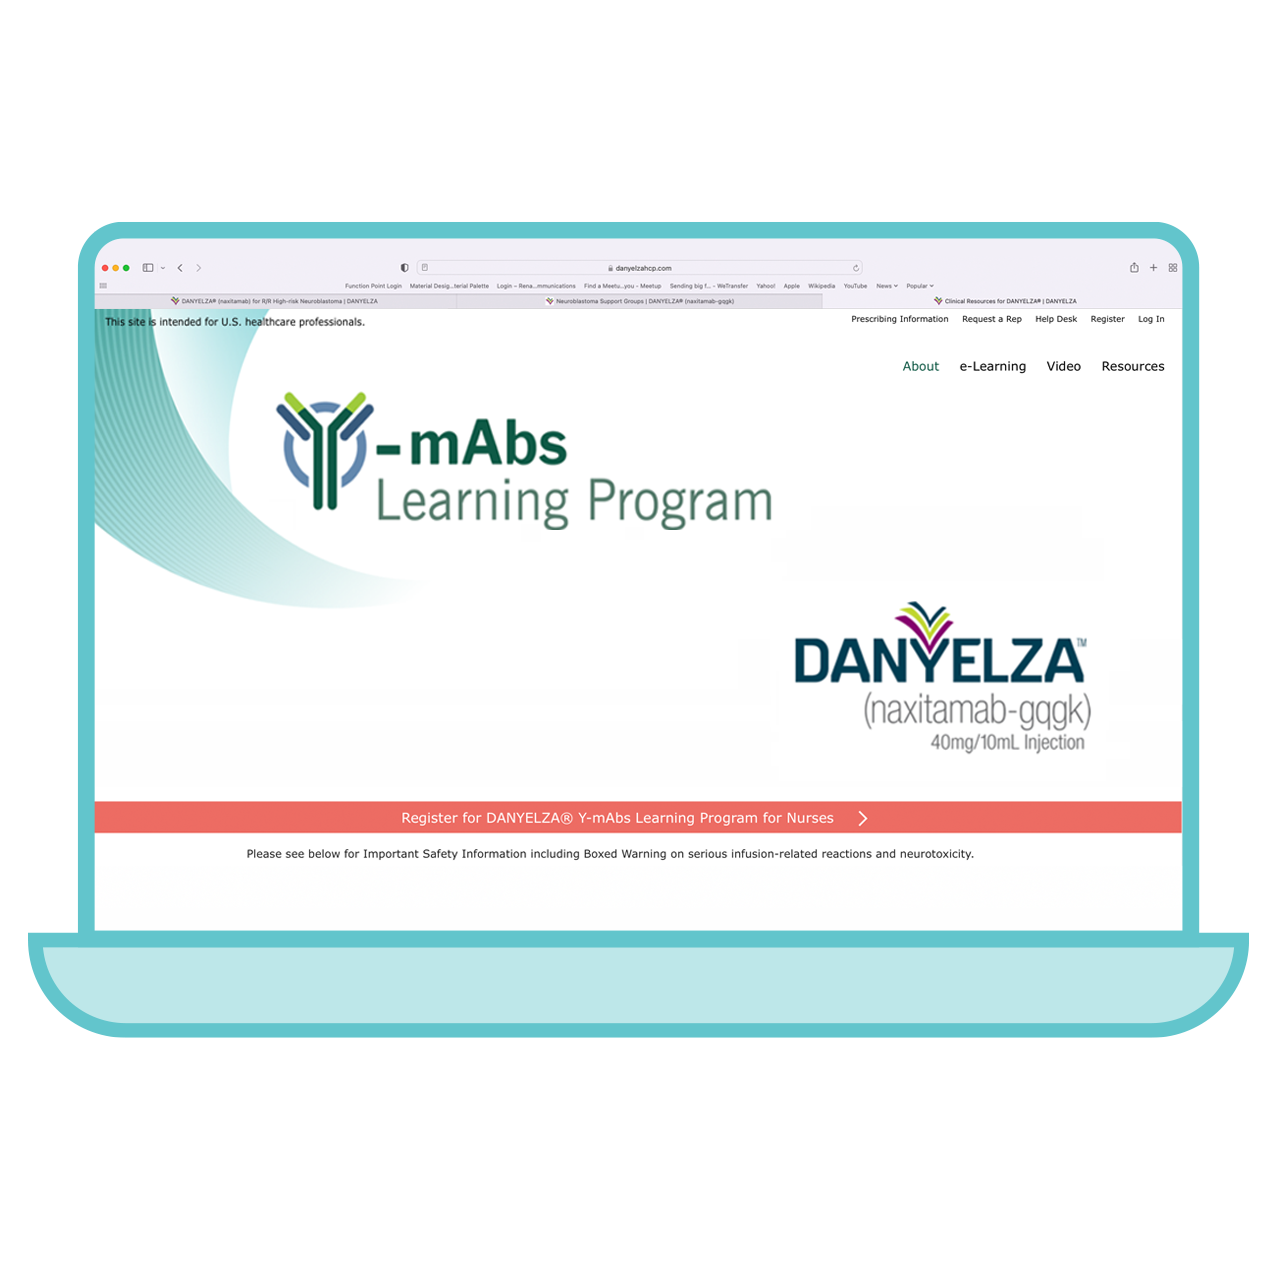 Visit the Y-mAbs Learning Program